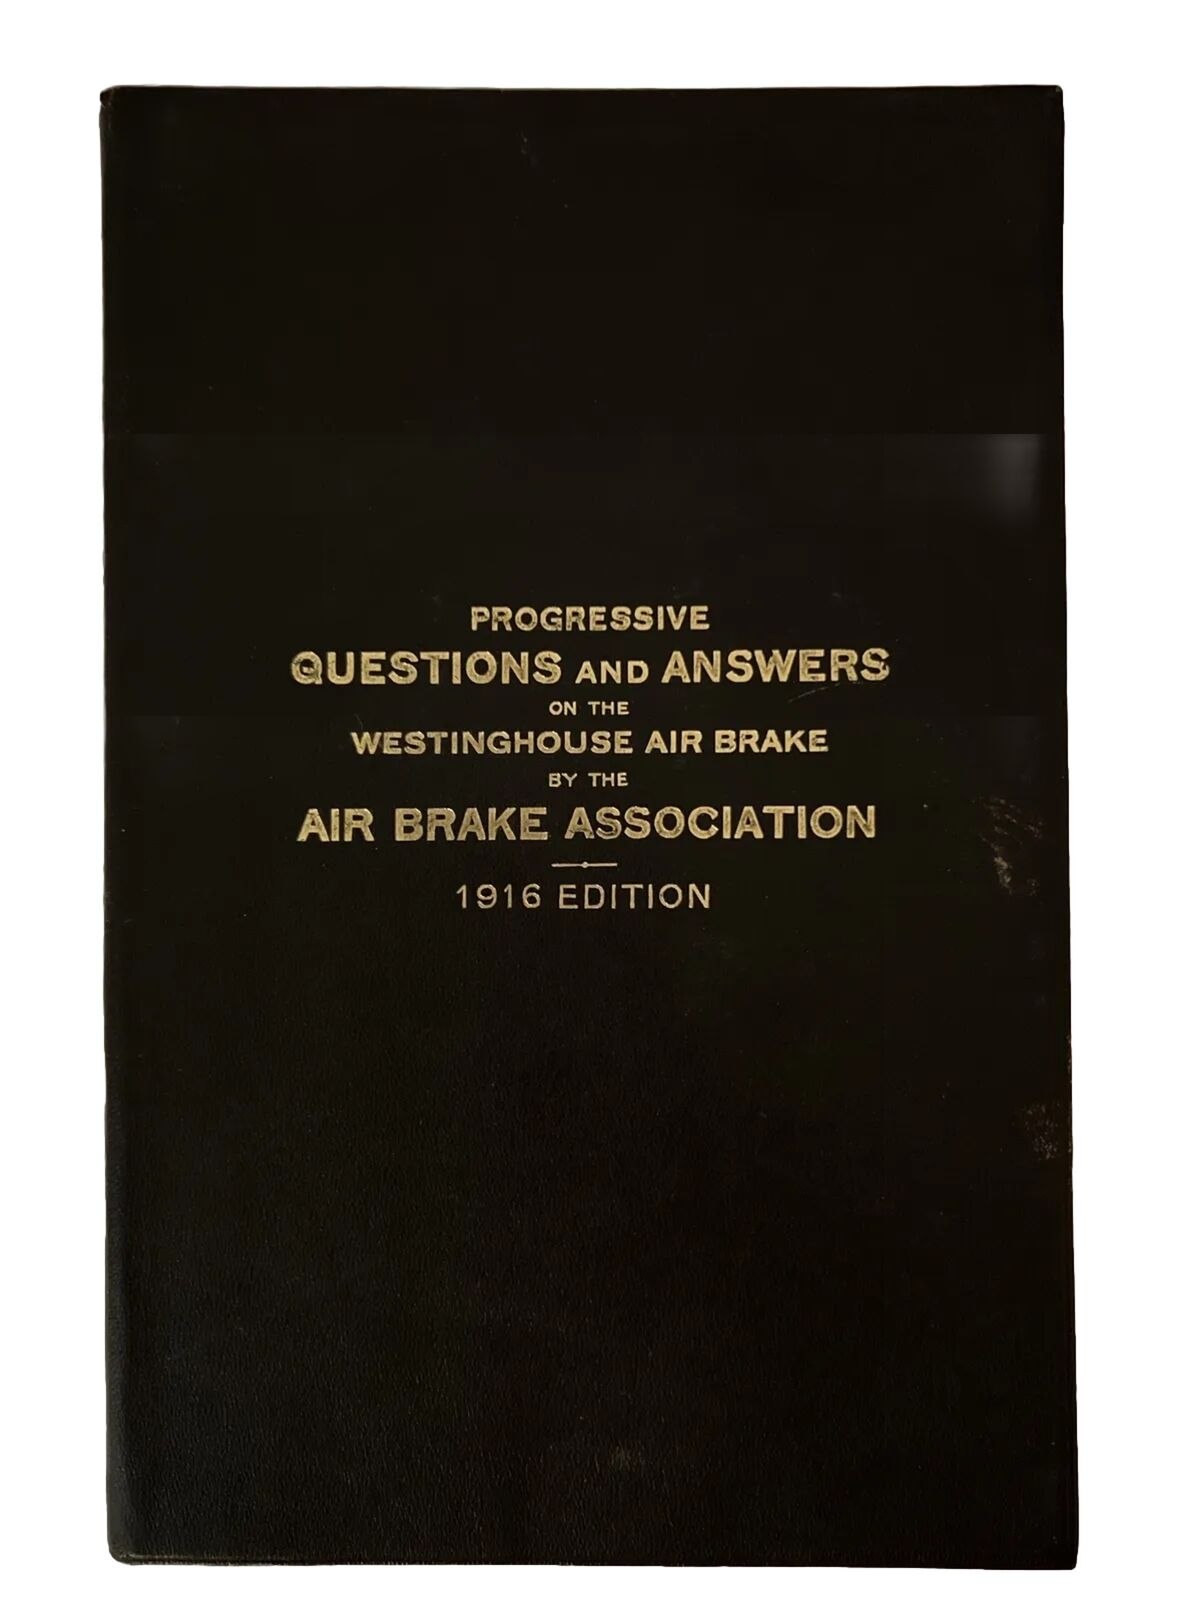 Progressive Questions And Answers Westinghouse Air Brake 1916 Edition